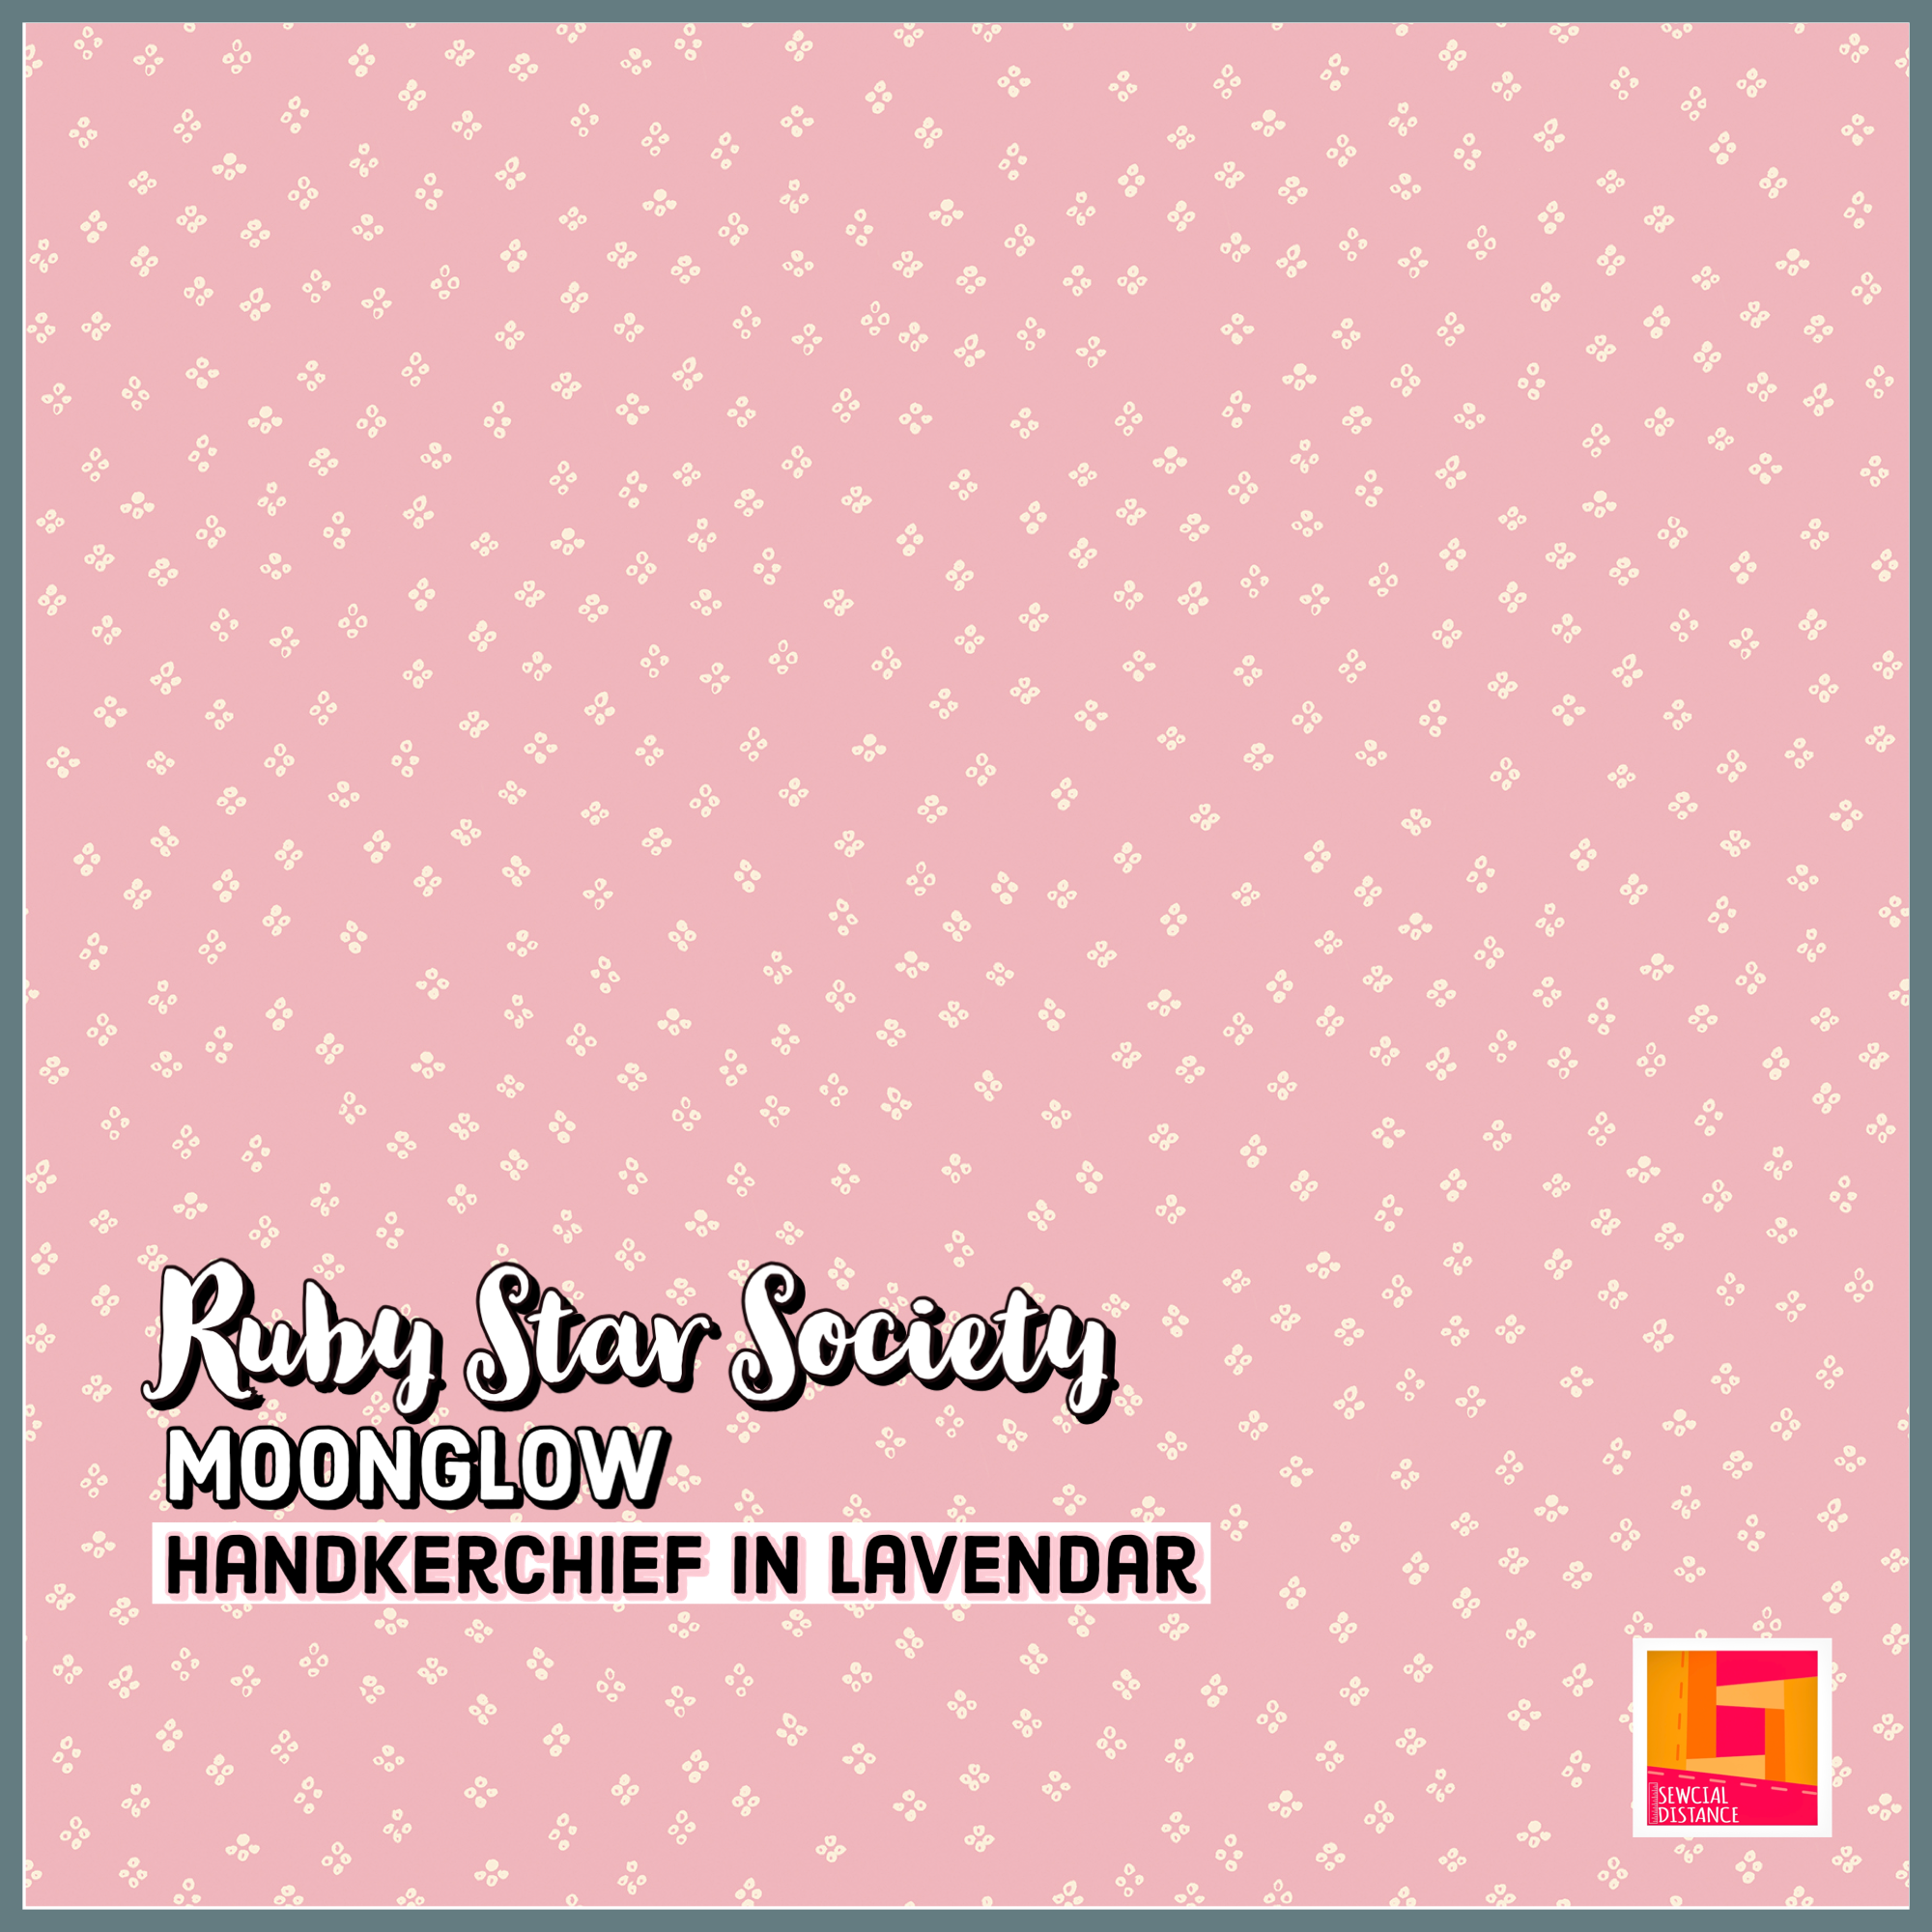 Ruby Star Society-Moonglow-Handkerchief in Lavender